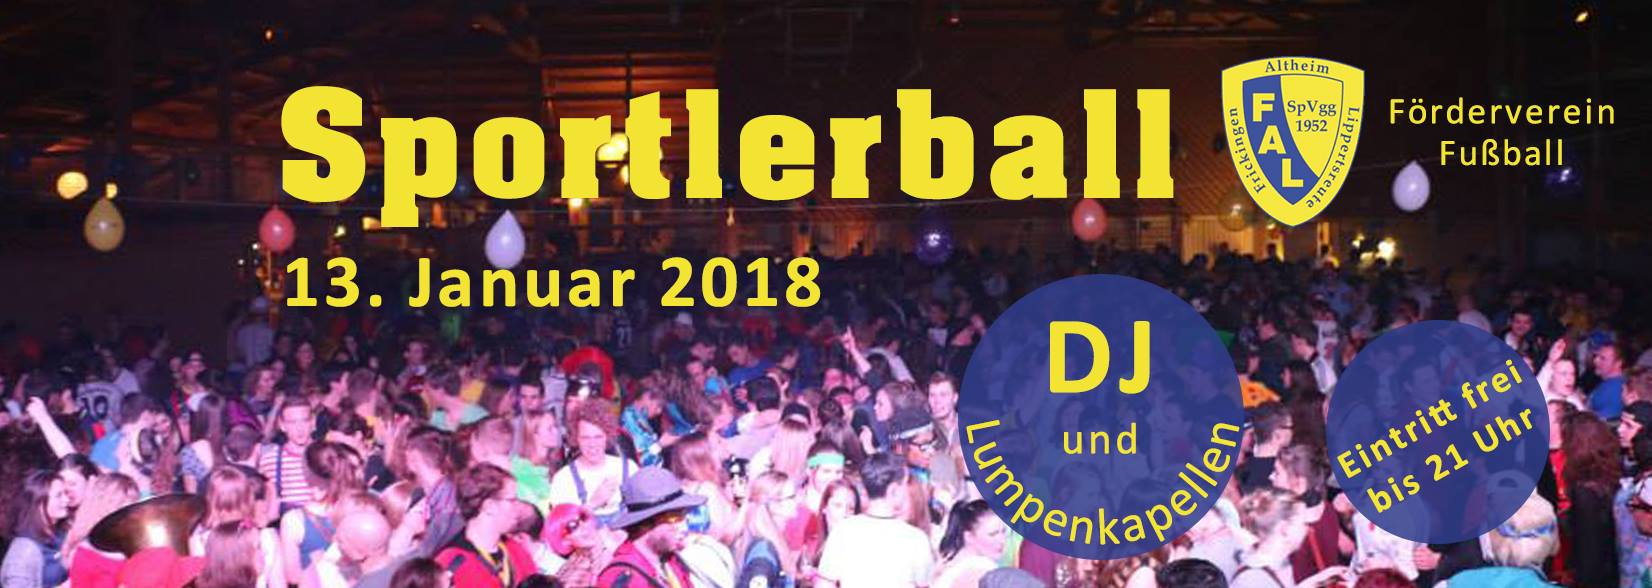 You are currently viewing Sportlerball am 13.01.2018